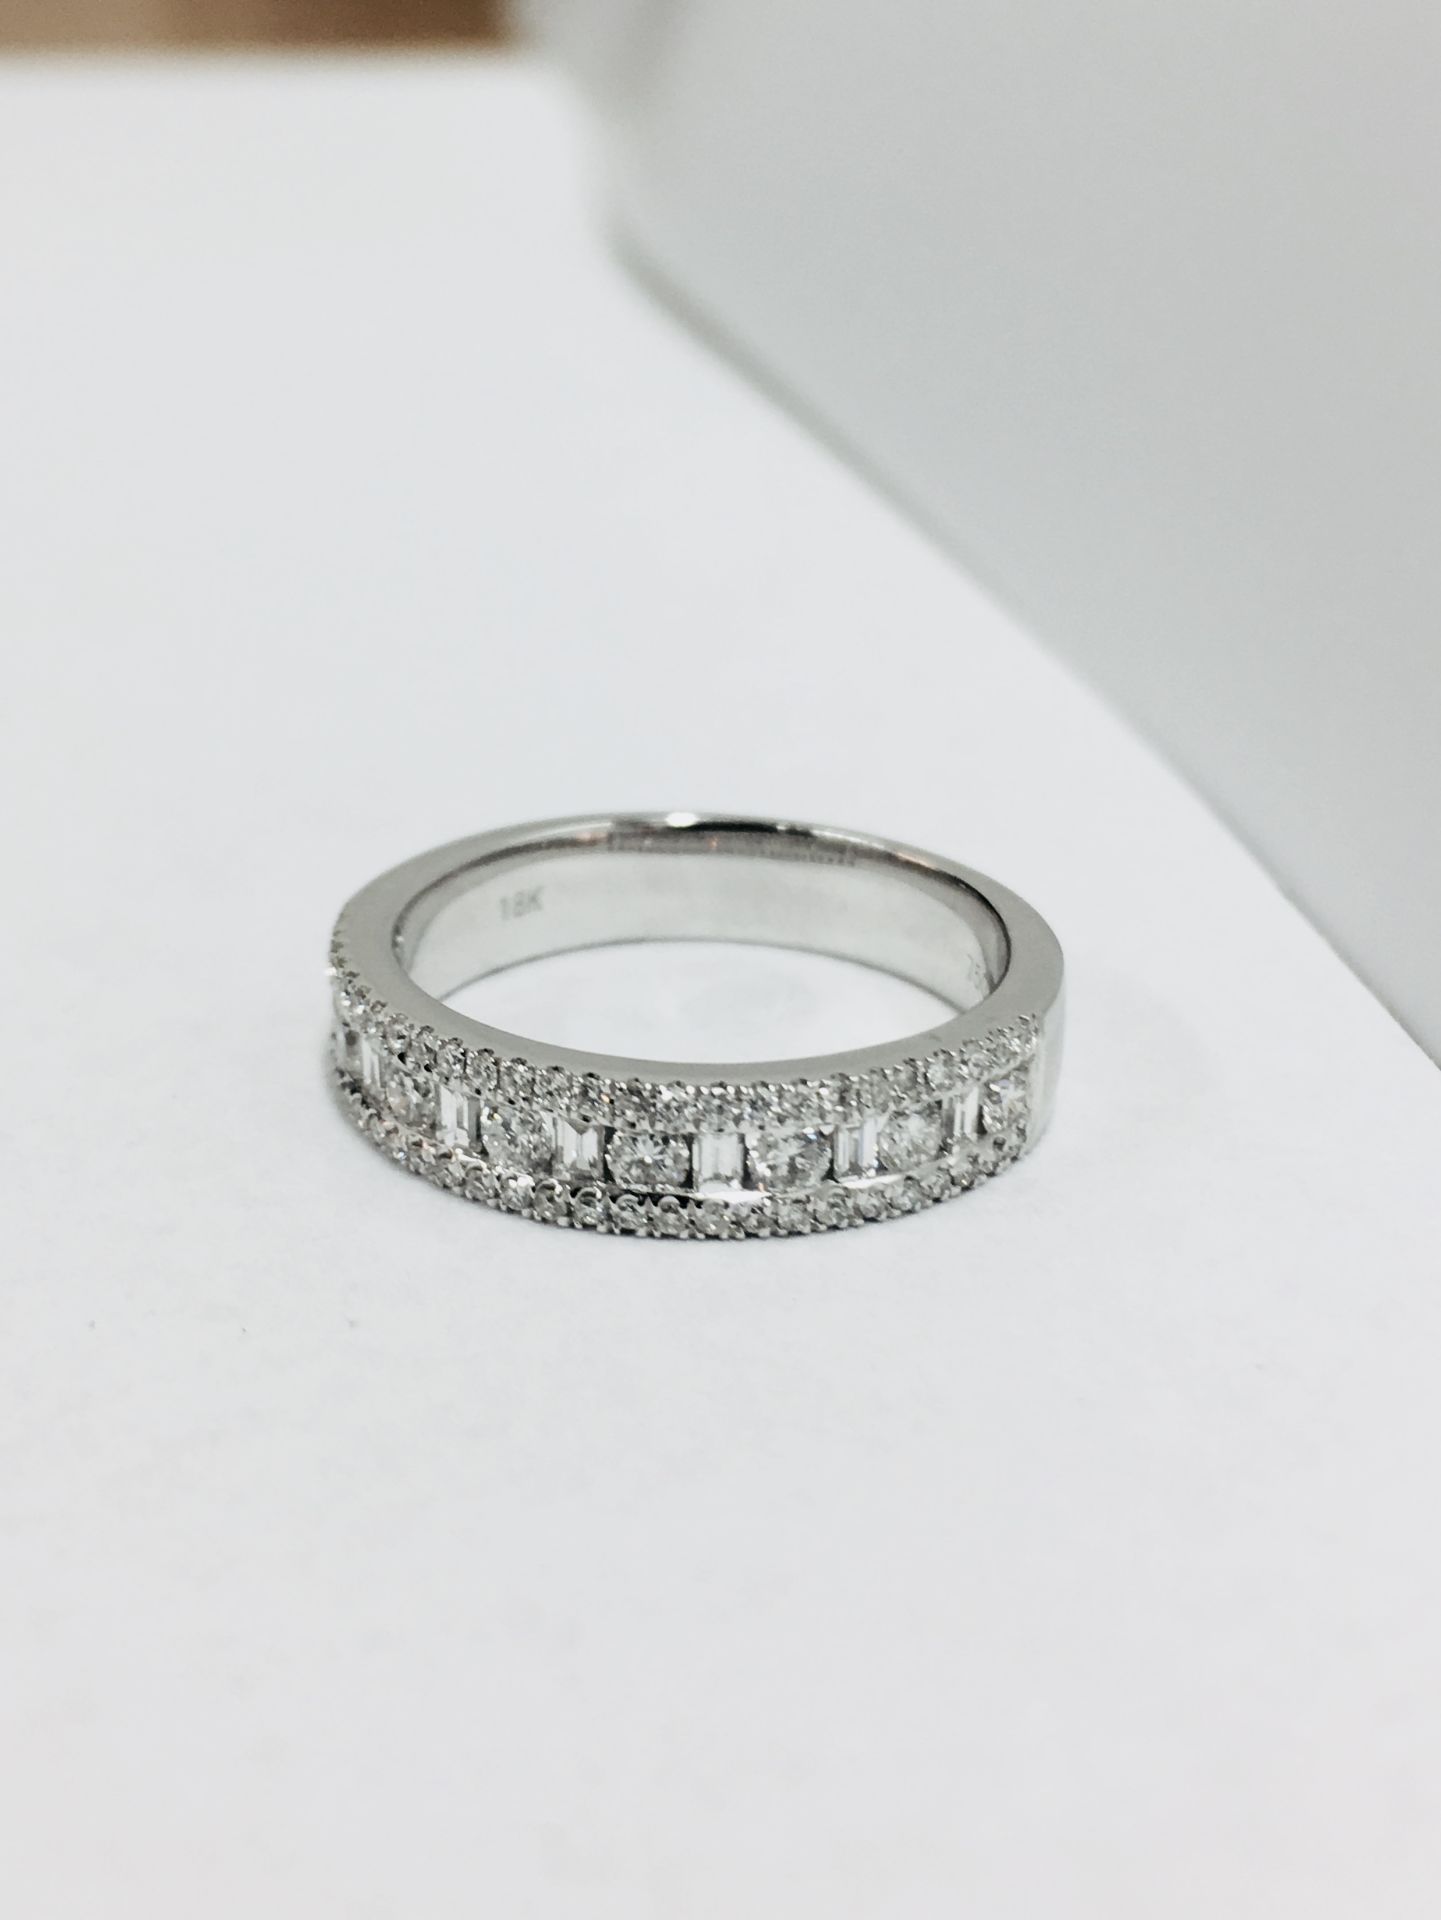 18ct white gold diamond dress ring,0.50ct diamond round and baguette h colour vs clarity,4.08gms - Image 2 of 4